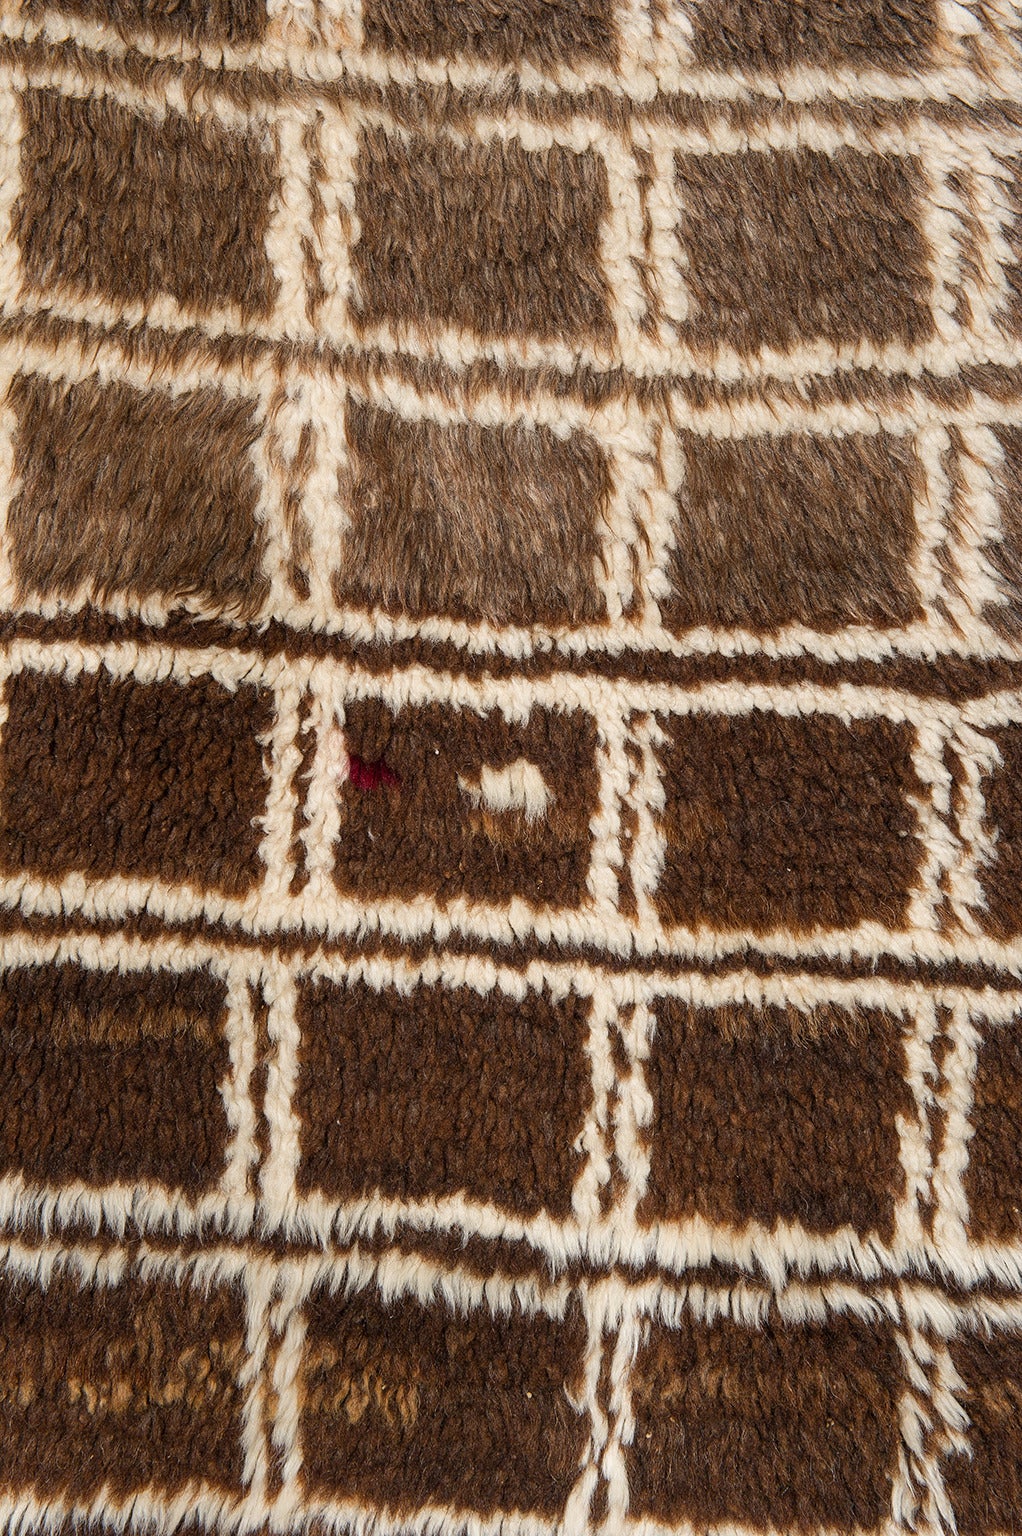 Vintage TULU o PATU (blanket), warm chestnut colour and soft wool : modern minimalist taste -
Suitable on an armchair, not only as carpet as usual -
nr. 391.